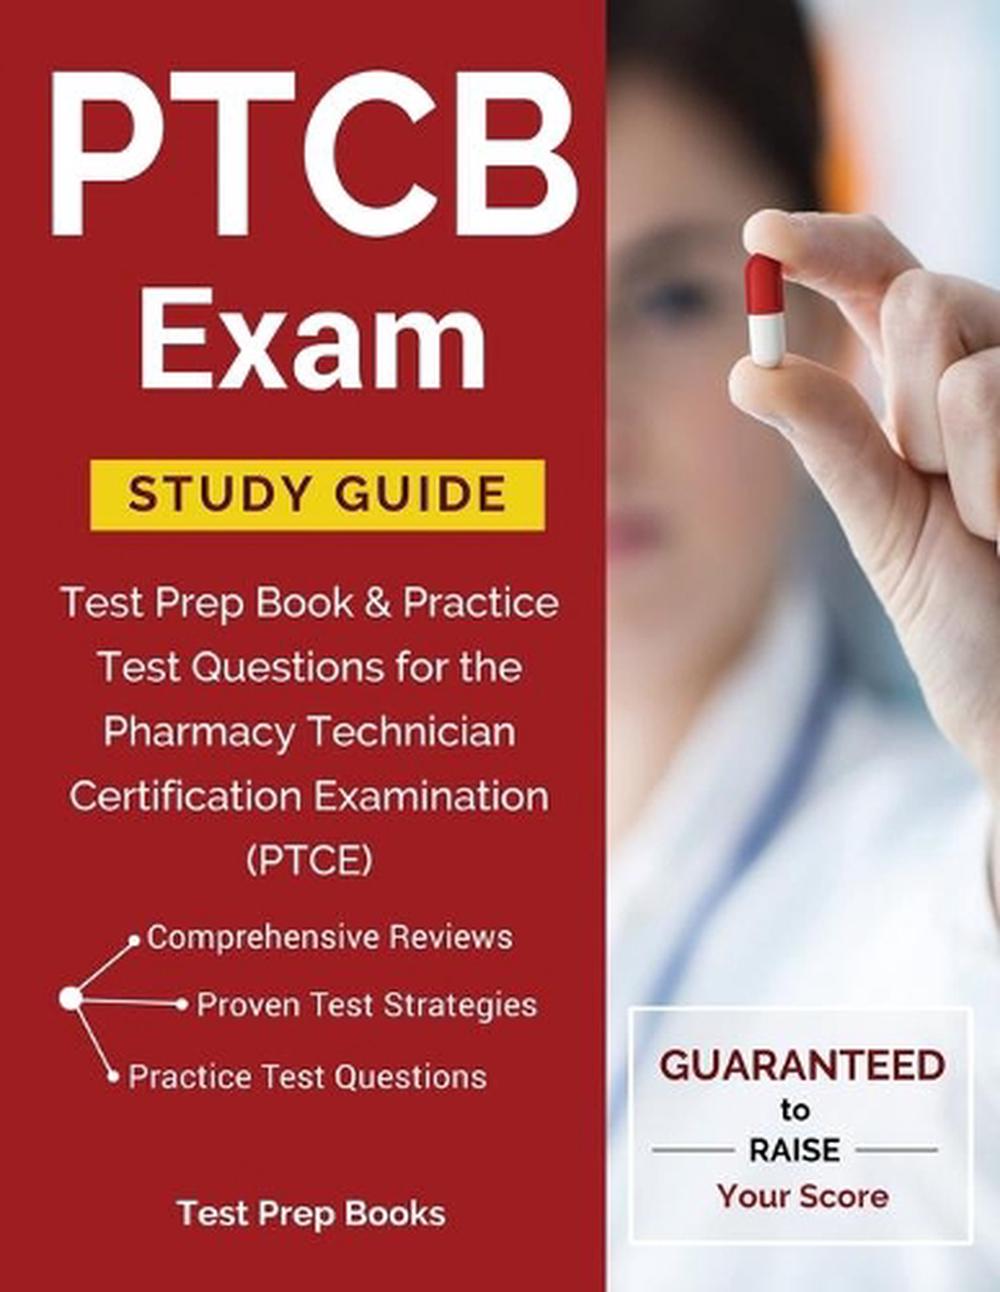 Ptcb Exam Study Guide Test Prep Book & Practice Test Questions for the